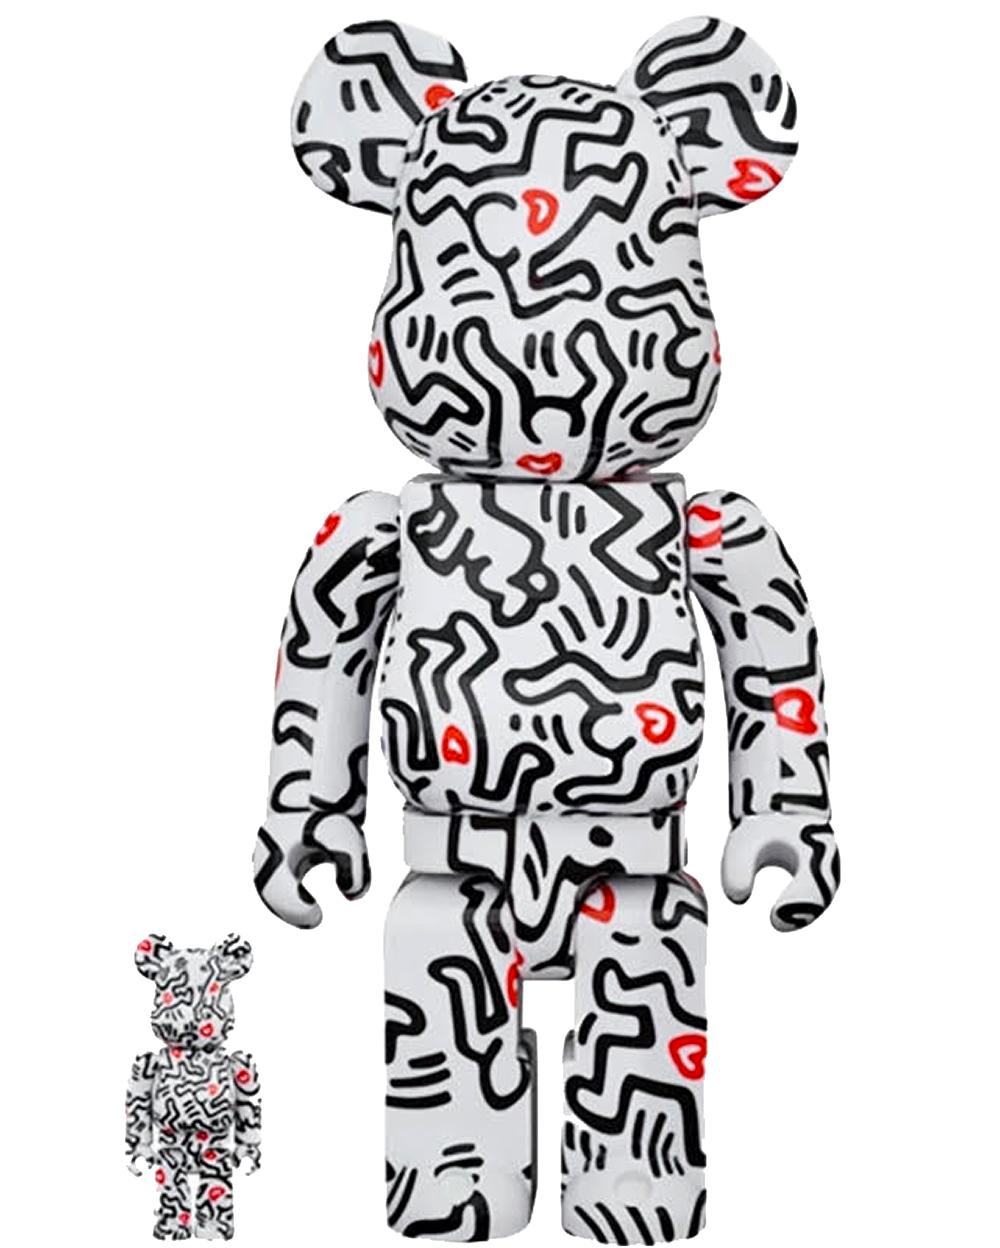 Keith Haring Bearbrick 400% art toy  (Keith Haring BE@RBRICK)  - Sculpture by (after) Keith Haring